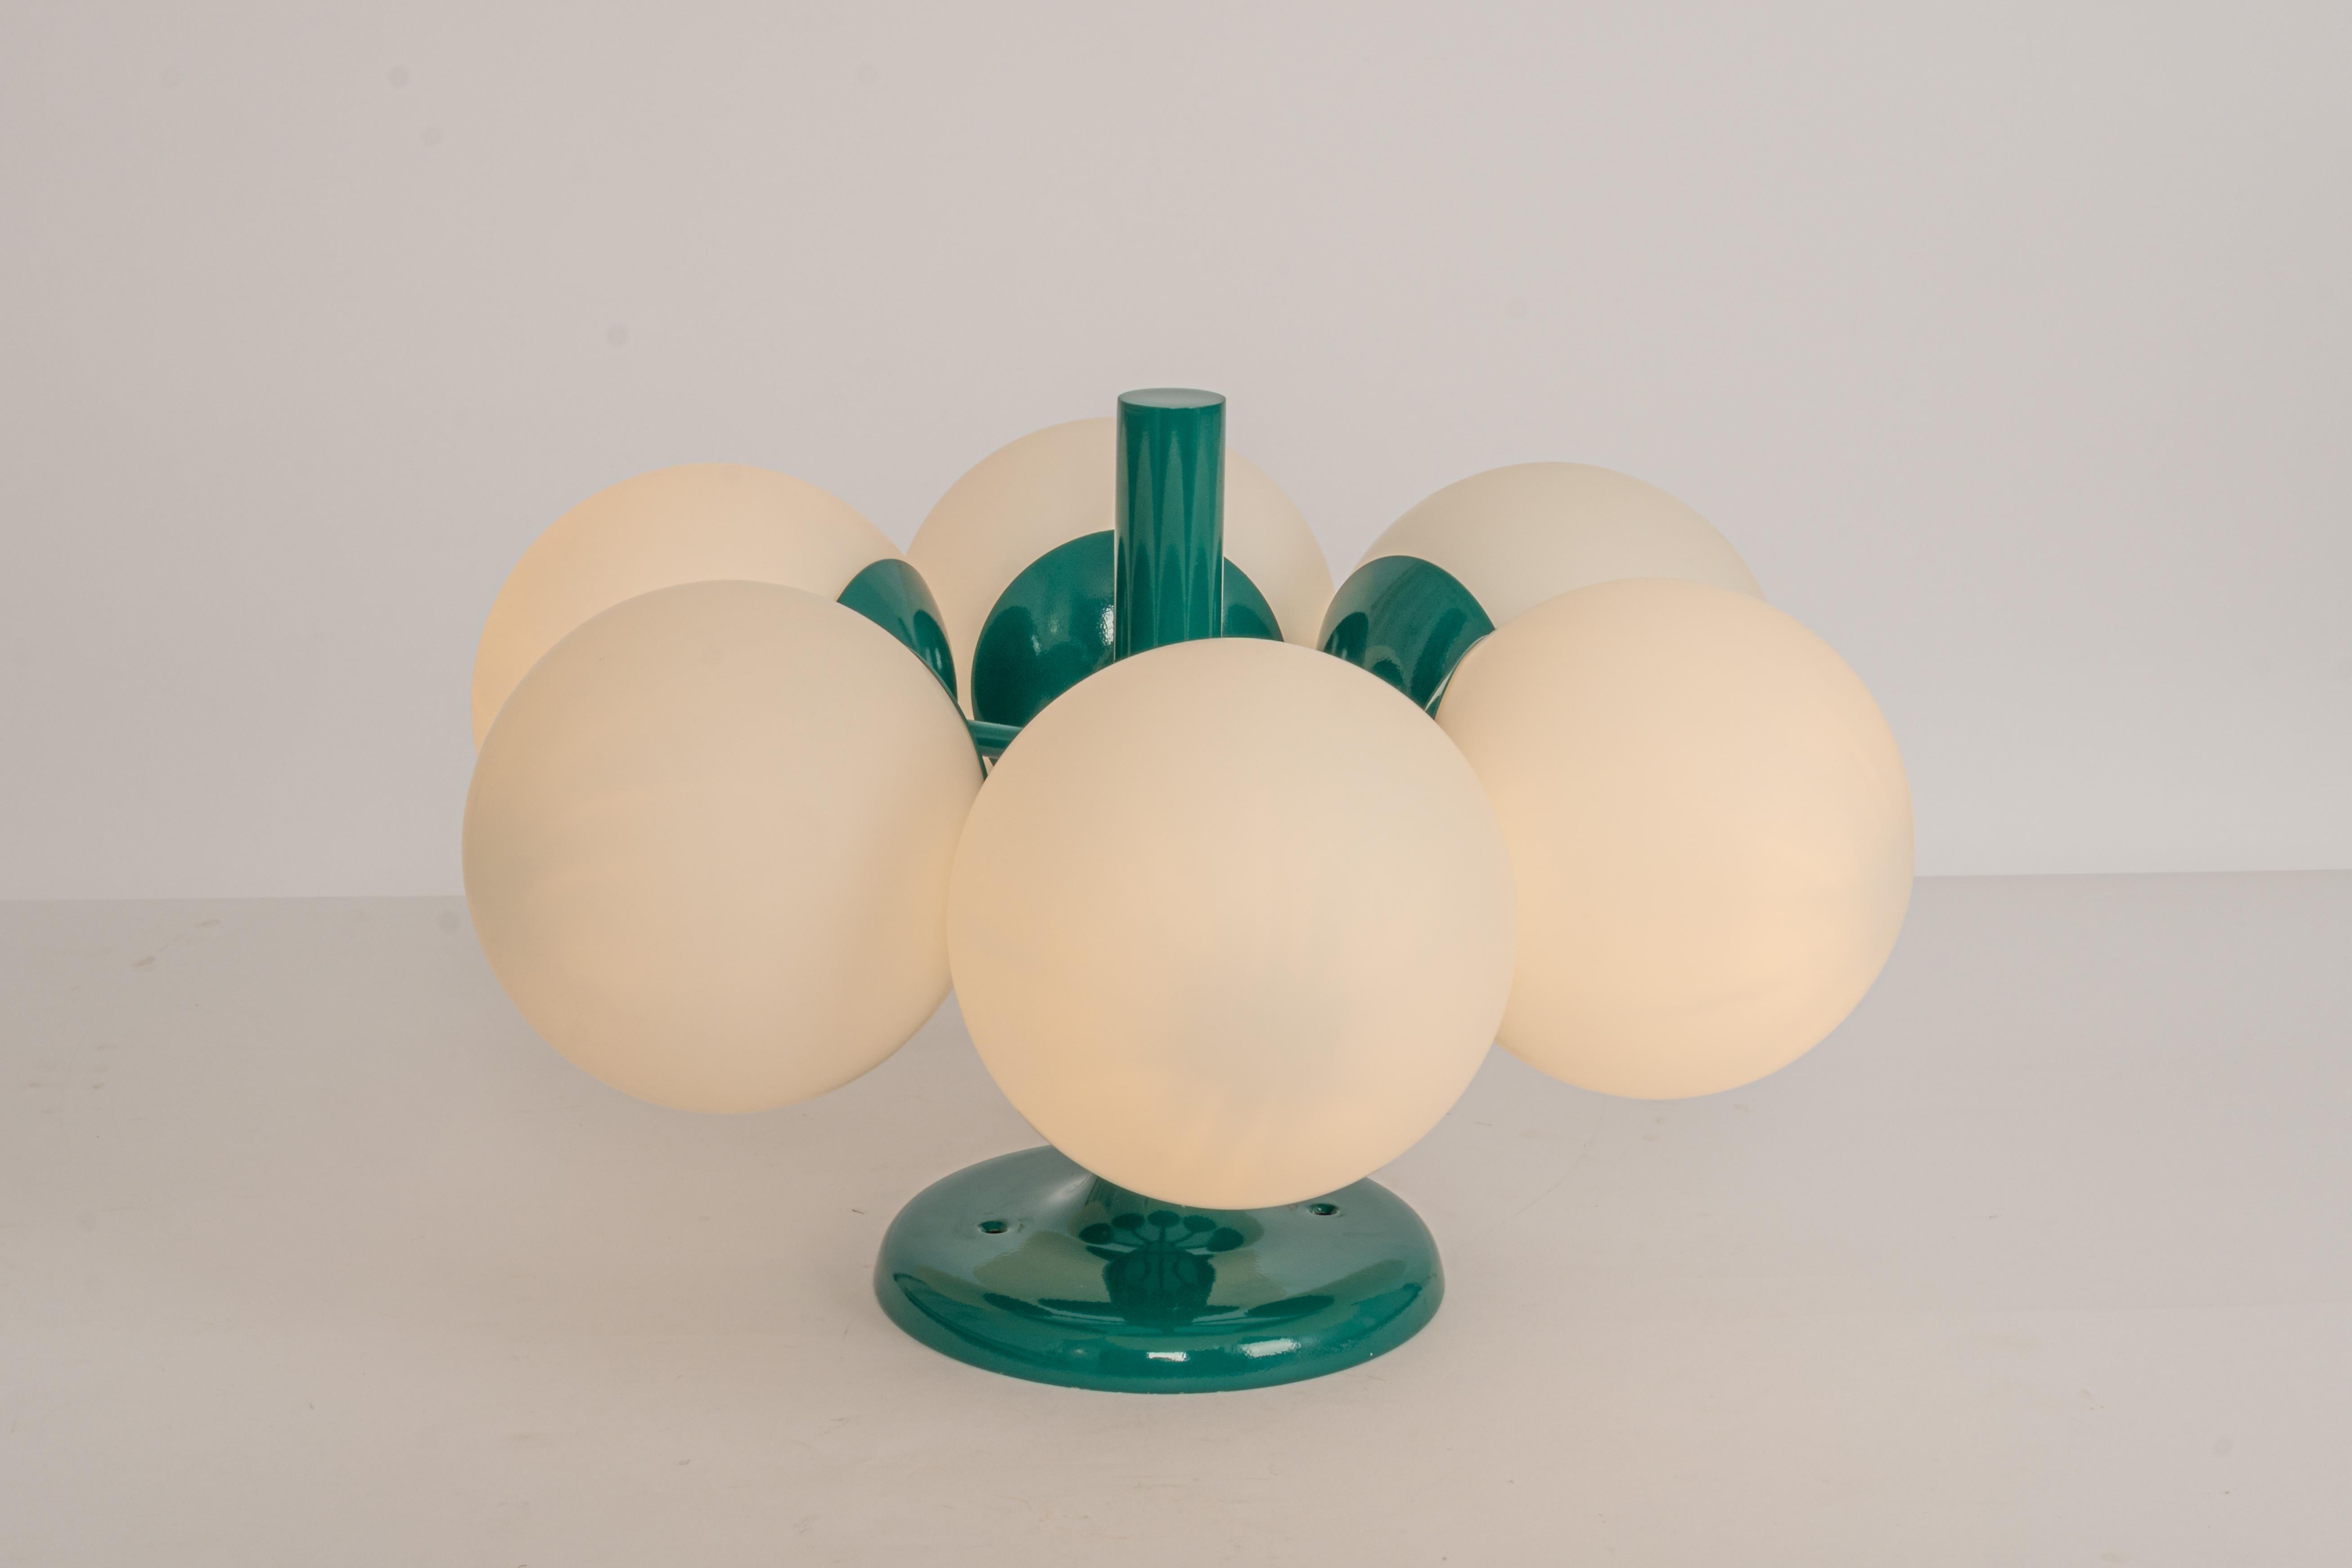 Midcentury Orbital Ceiling /Wall Lamp in Green by Kaiser, Germany, 1970s For Sale 3